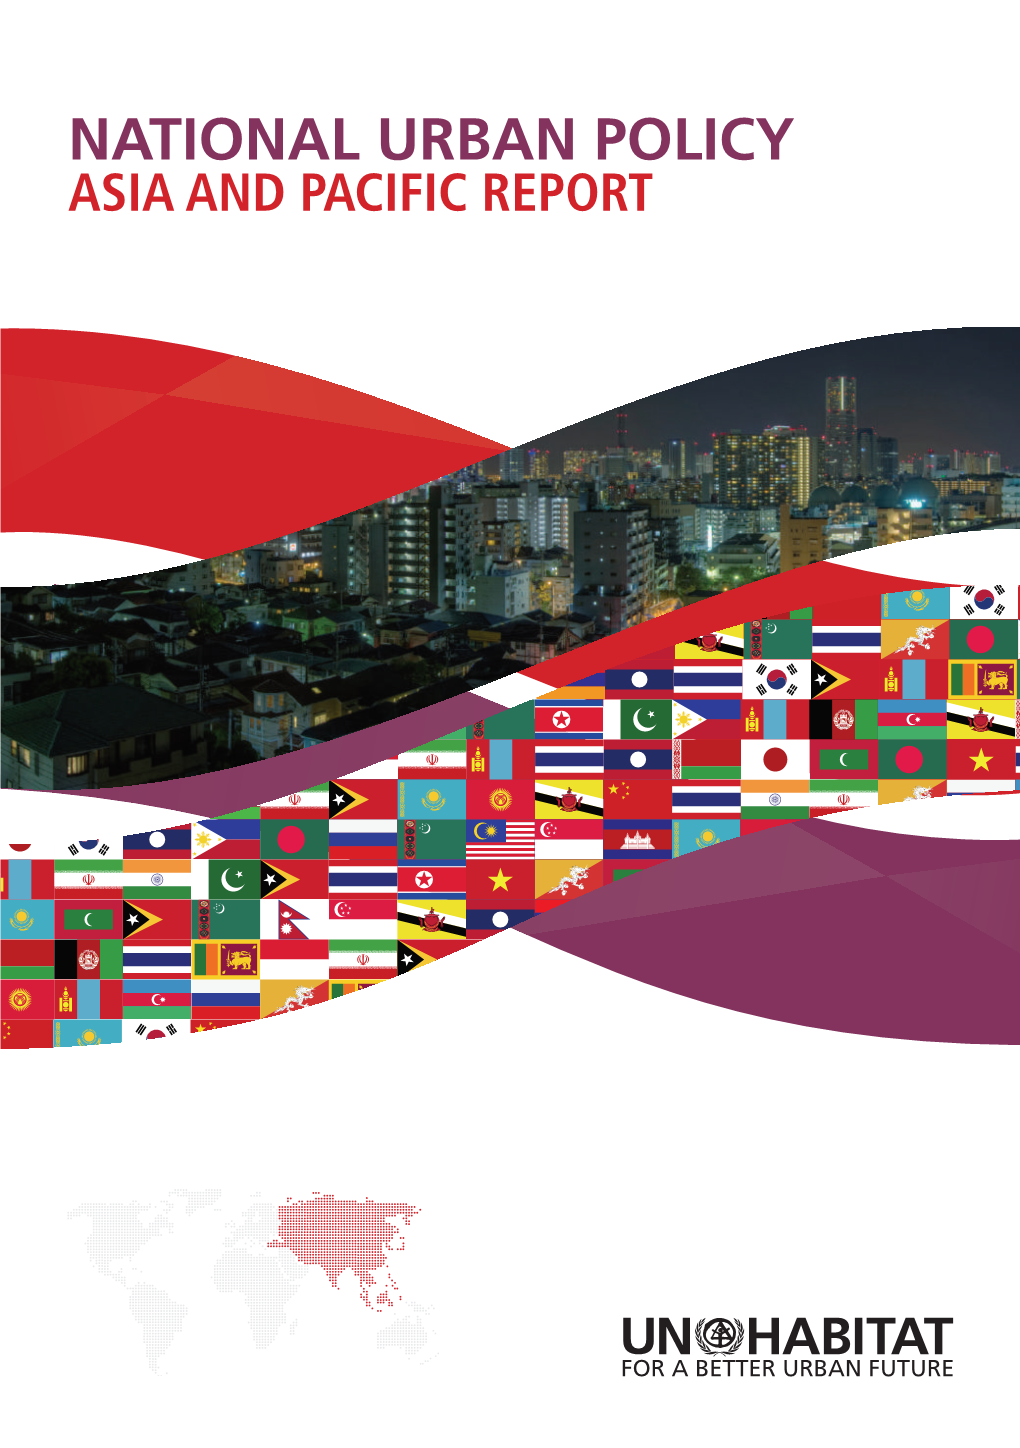 NATIONAL URBAN POLICY Asia and Pacific REPORT